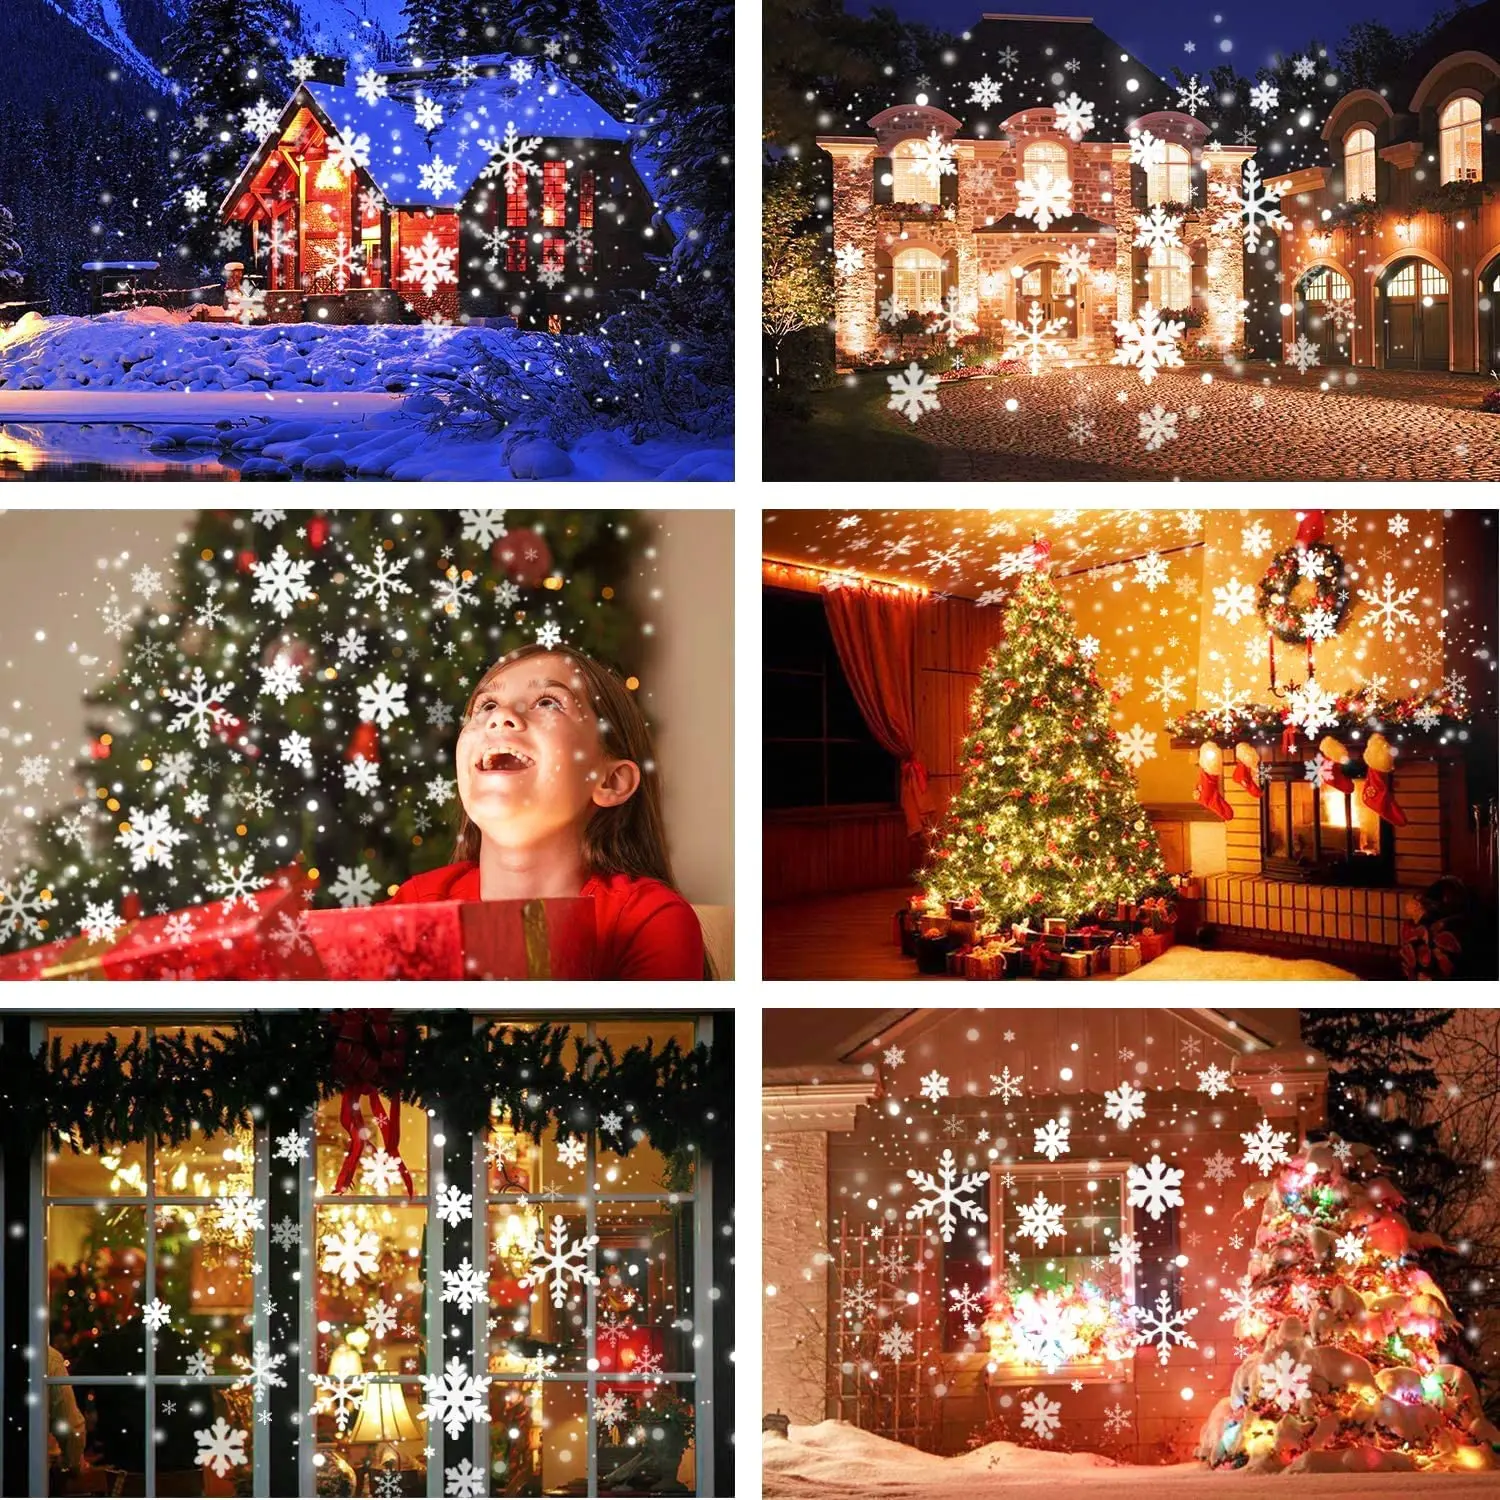 Christmas Holiday Light Projector,Snowfall Projector Lights with Remote  Control,Rotating Snow Falling Lights,Indoor Outdoor Waterproof Landscape  Decorative Lighting for Halloween Wedding Party Garden